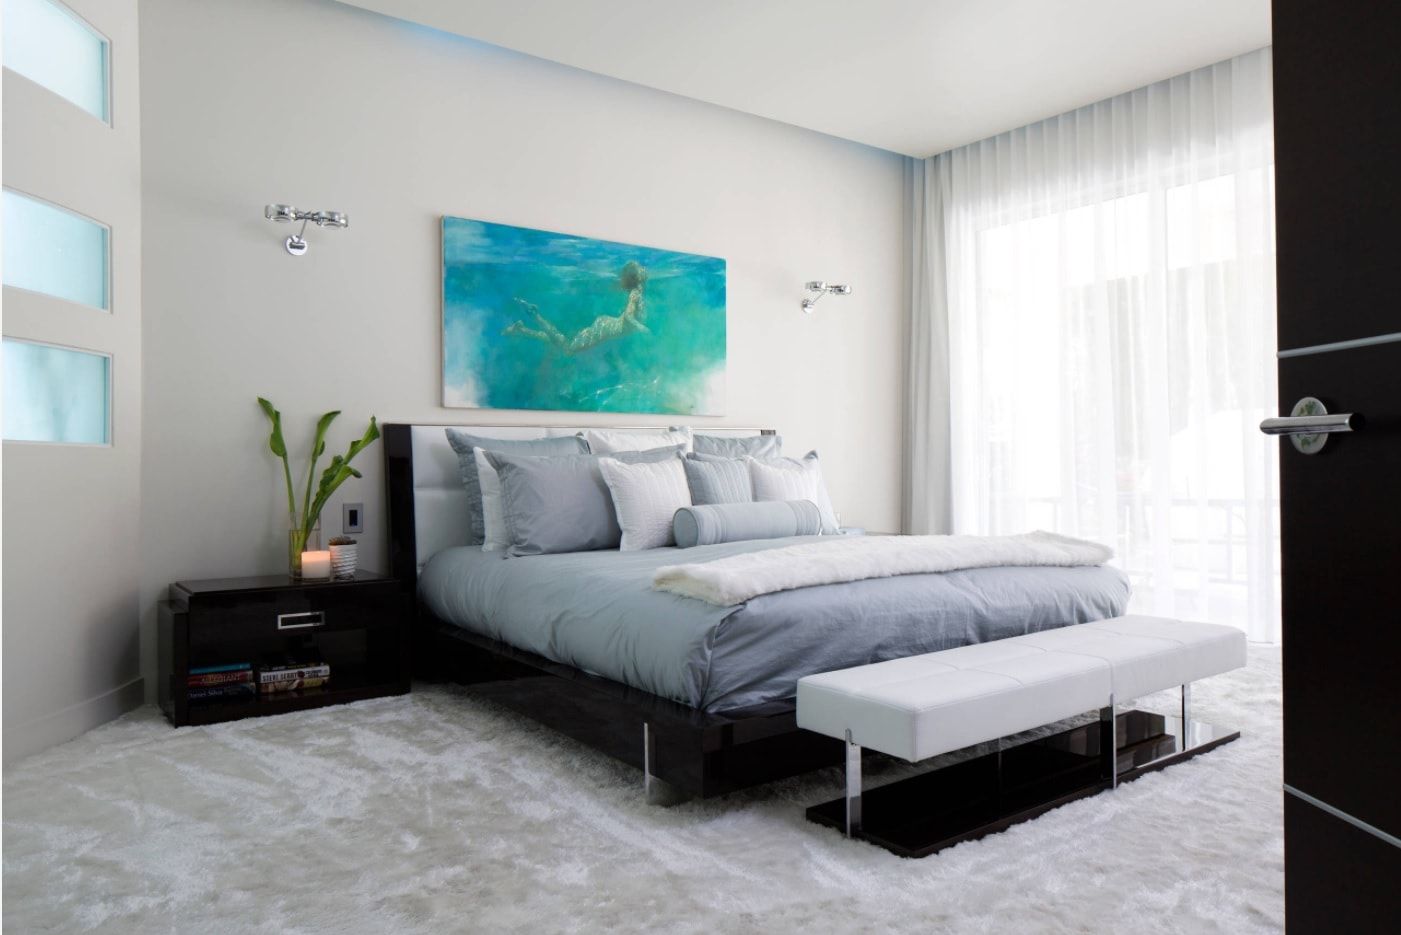 Monochromatic modern bedroom with bright picture at the headboard